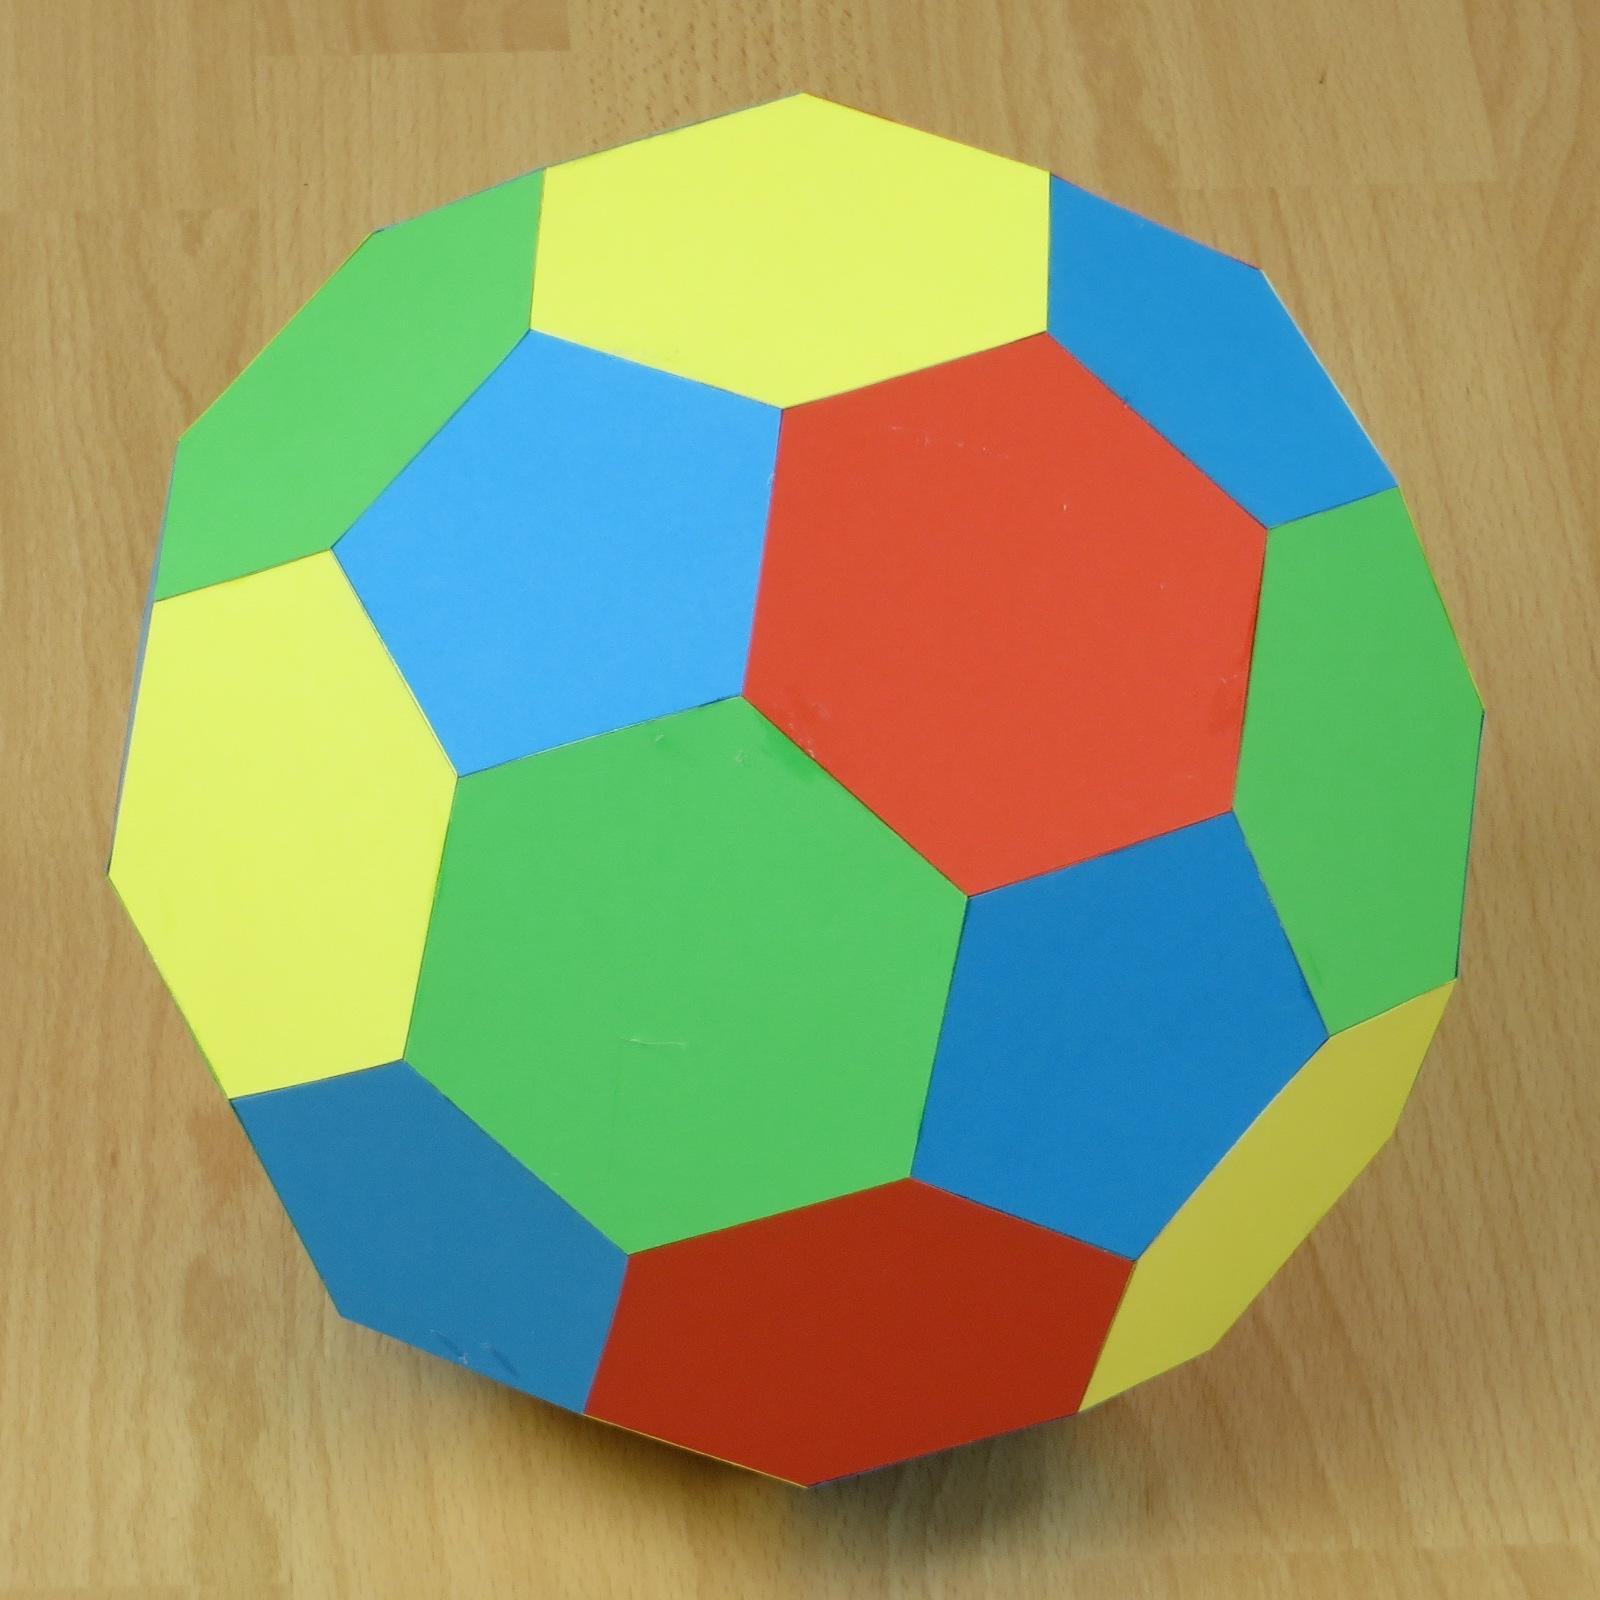 How To Make Origami Soccer Ball Paper Truncated Icosahedron Soccer Ball Or Football